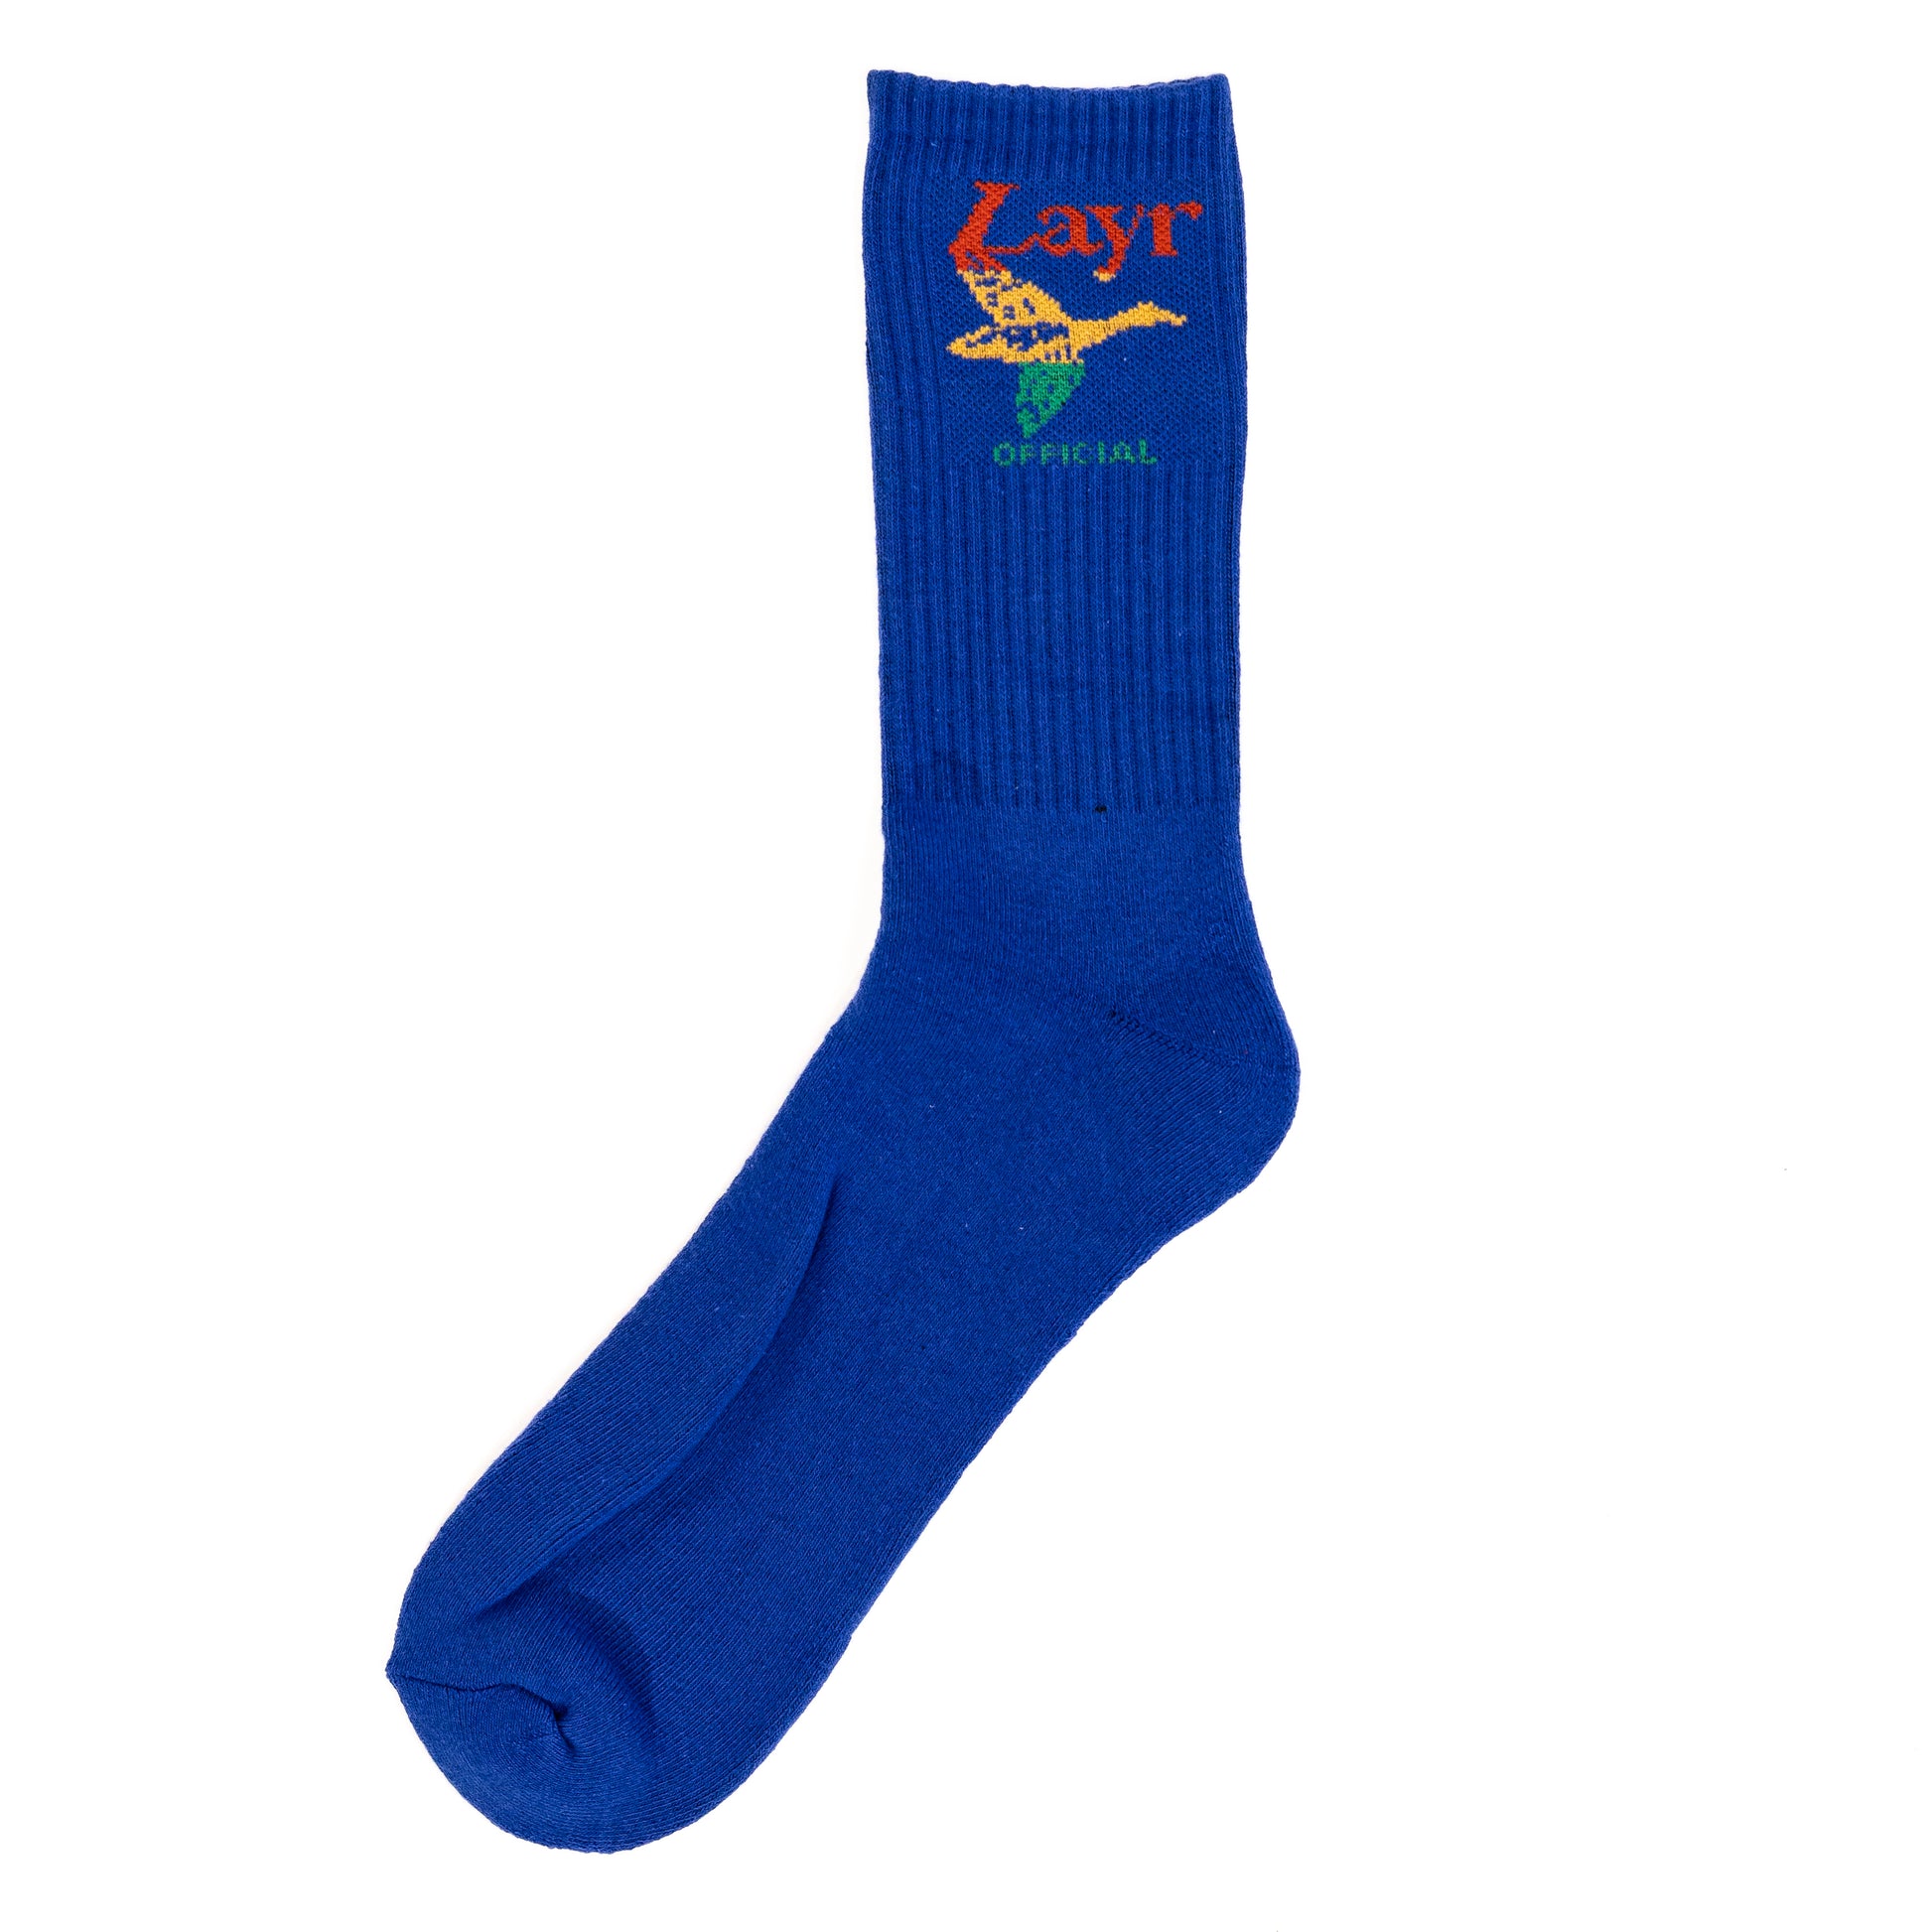 Flying Duck Sock - Layr Official